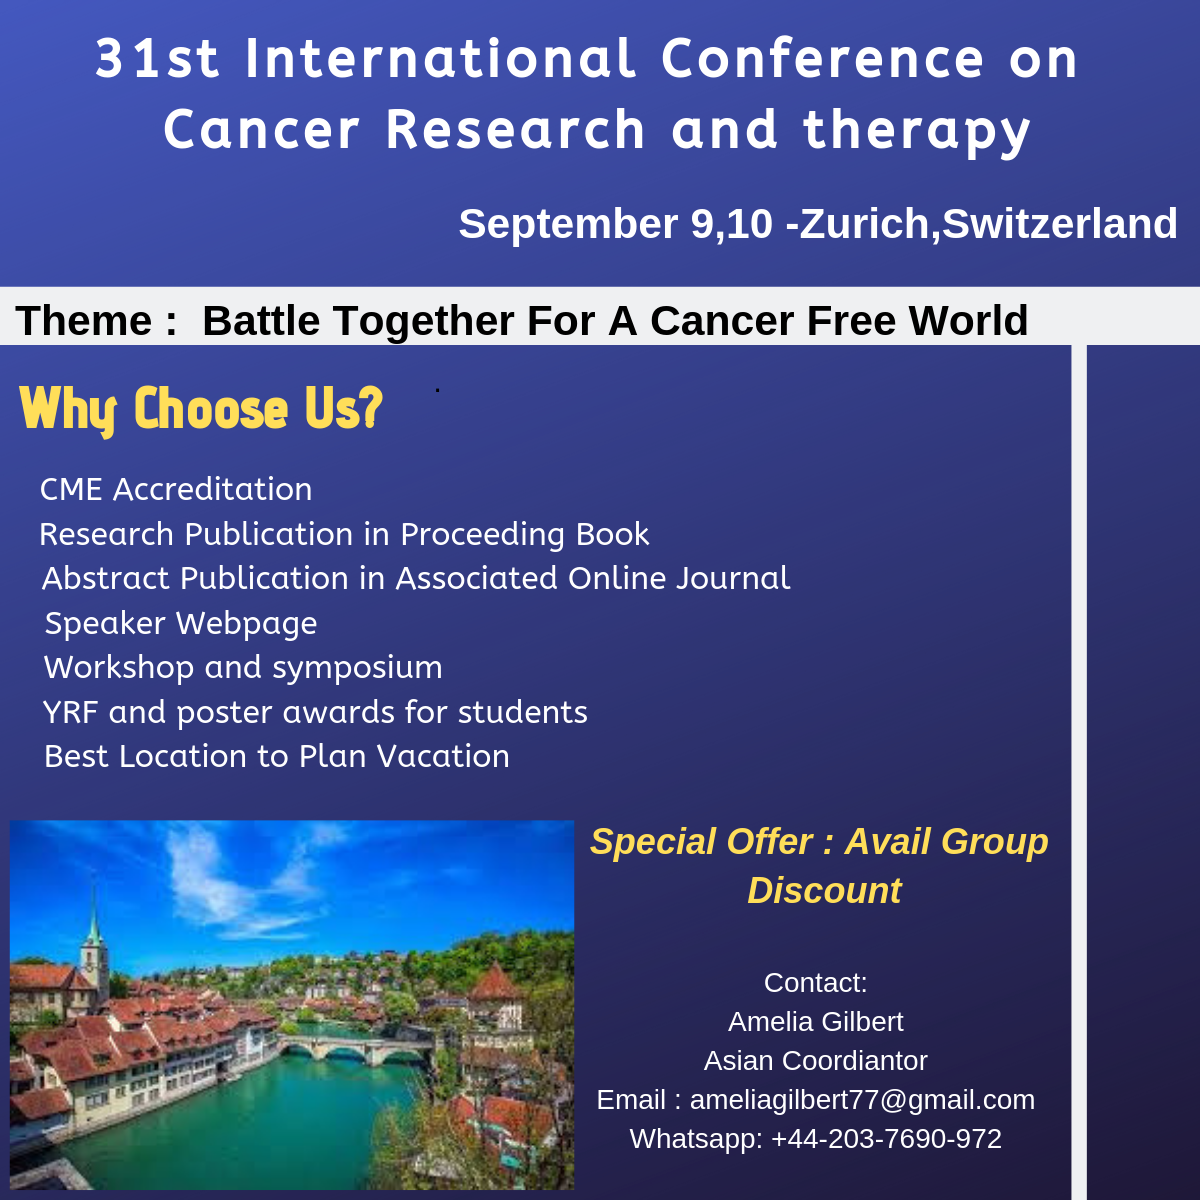 31st International Conference on Cancer Research and Therapy